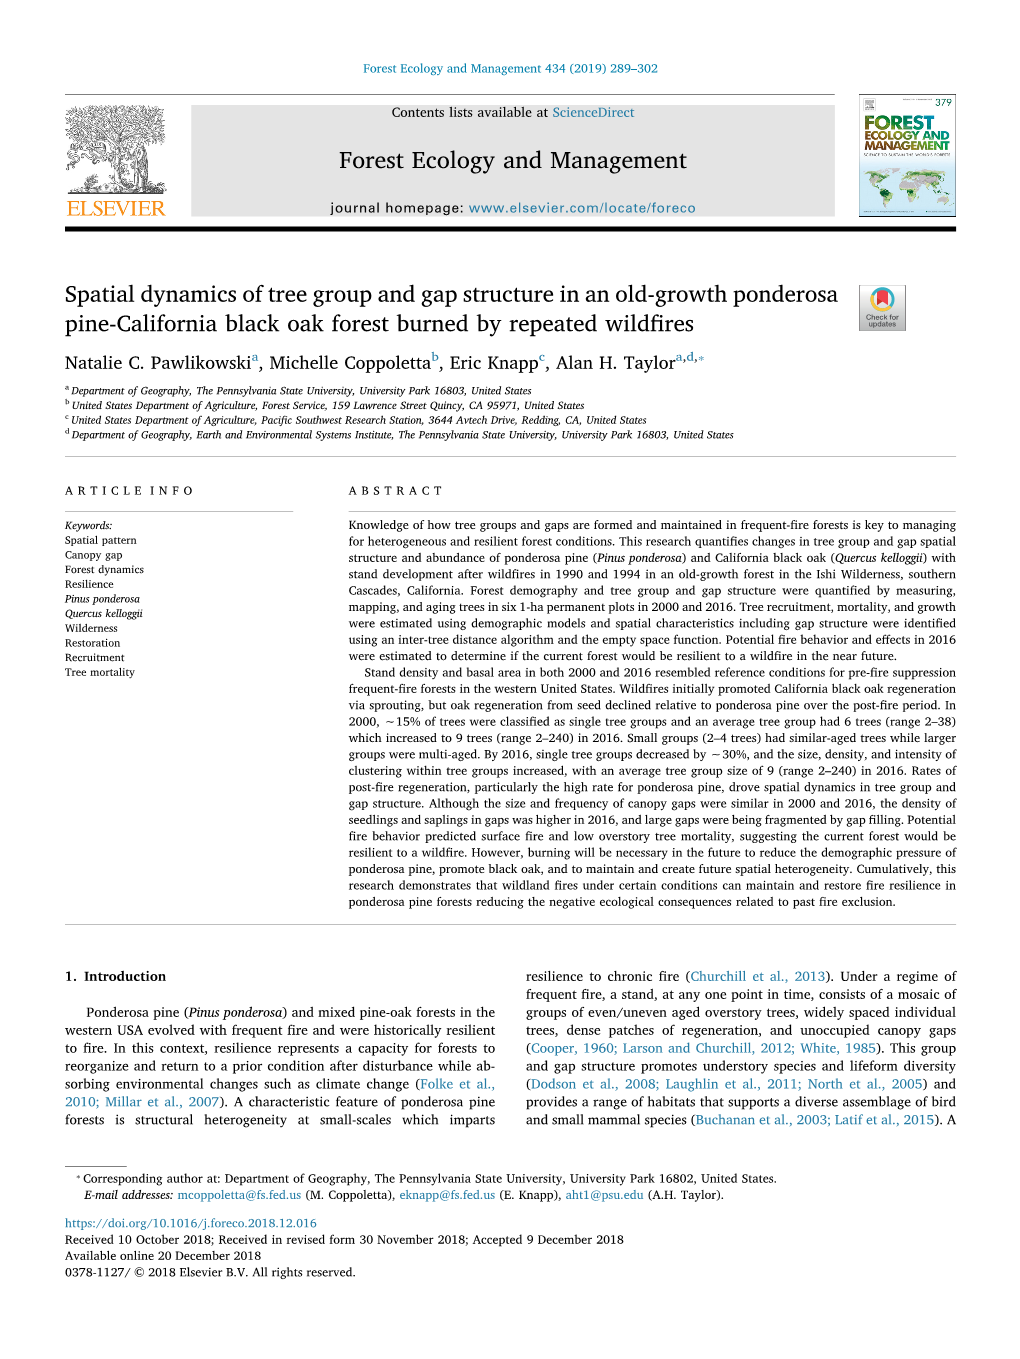 Spatial Dynamics of Tree Group and Gap Structure in an Old-Growth Ponderosa Pine-California Black Oak Forest Burned by Repeated Wildﬁres T ⁎ Natalie C